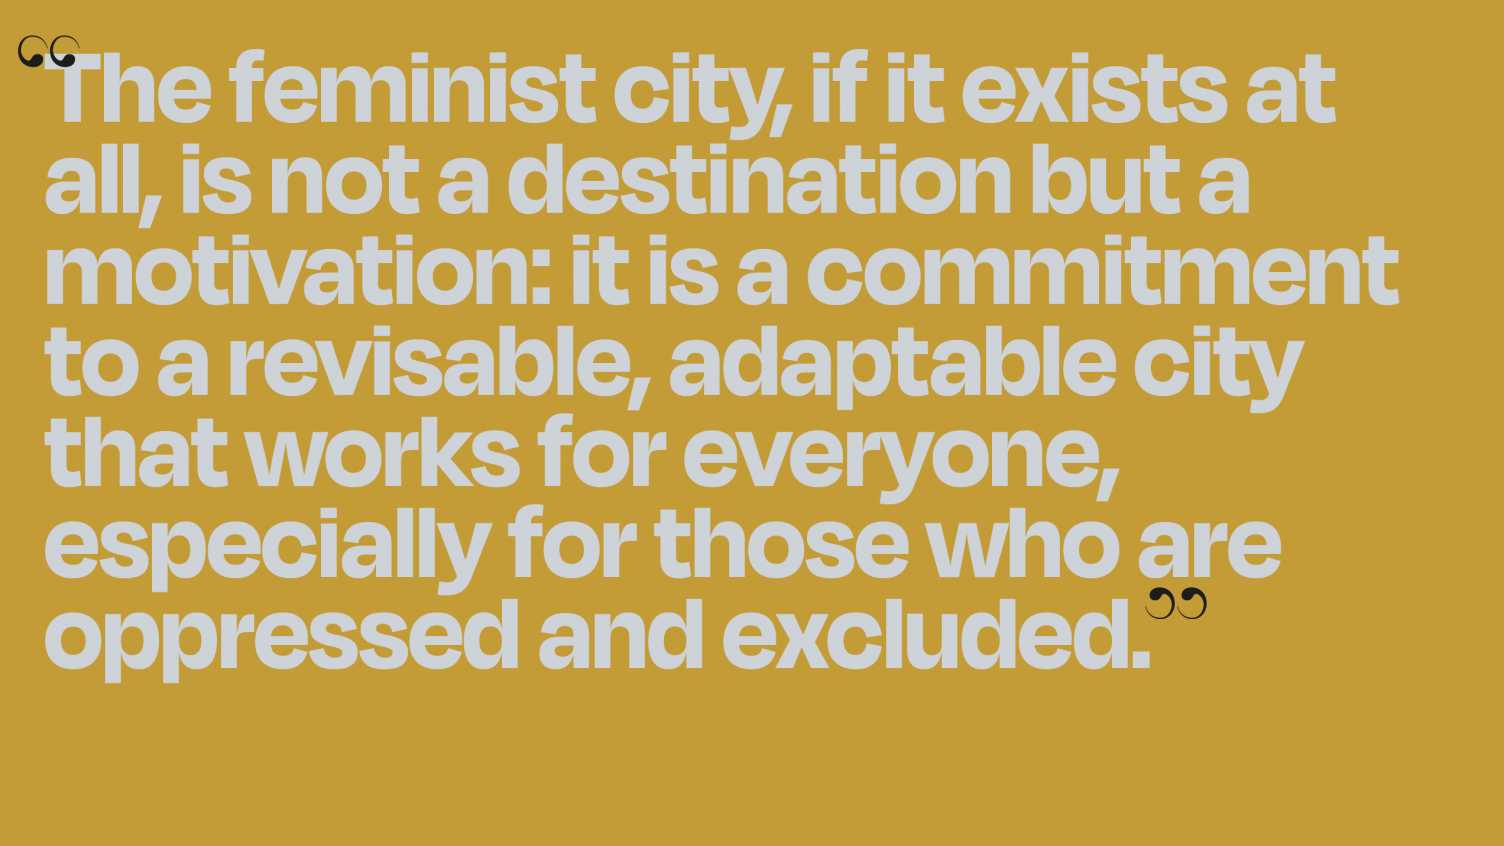 Thumbnail for Launch of new digital magazine Feminism and the City? | Urban Institute